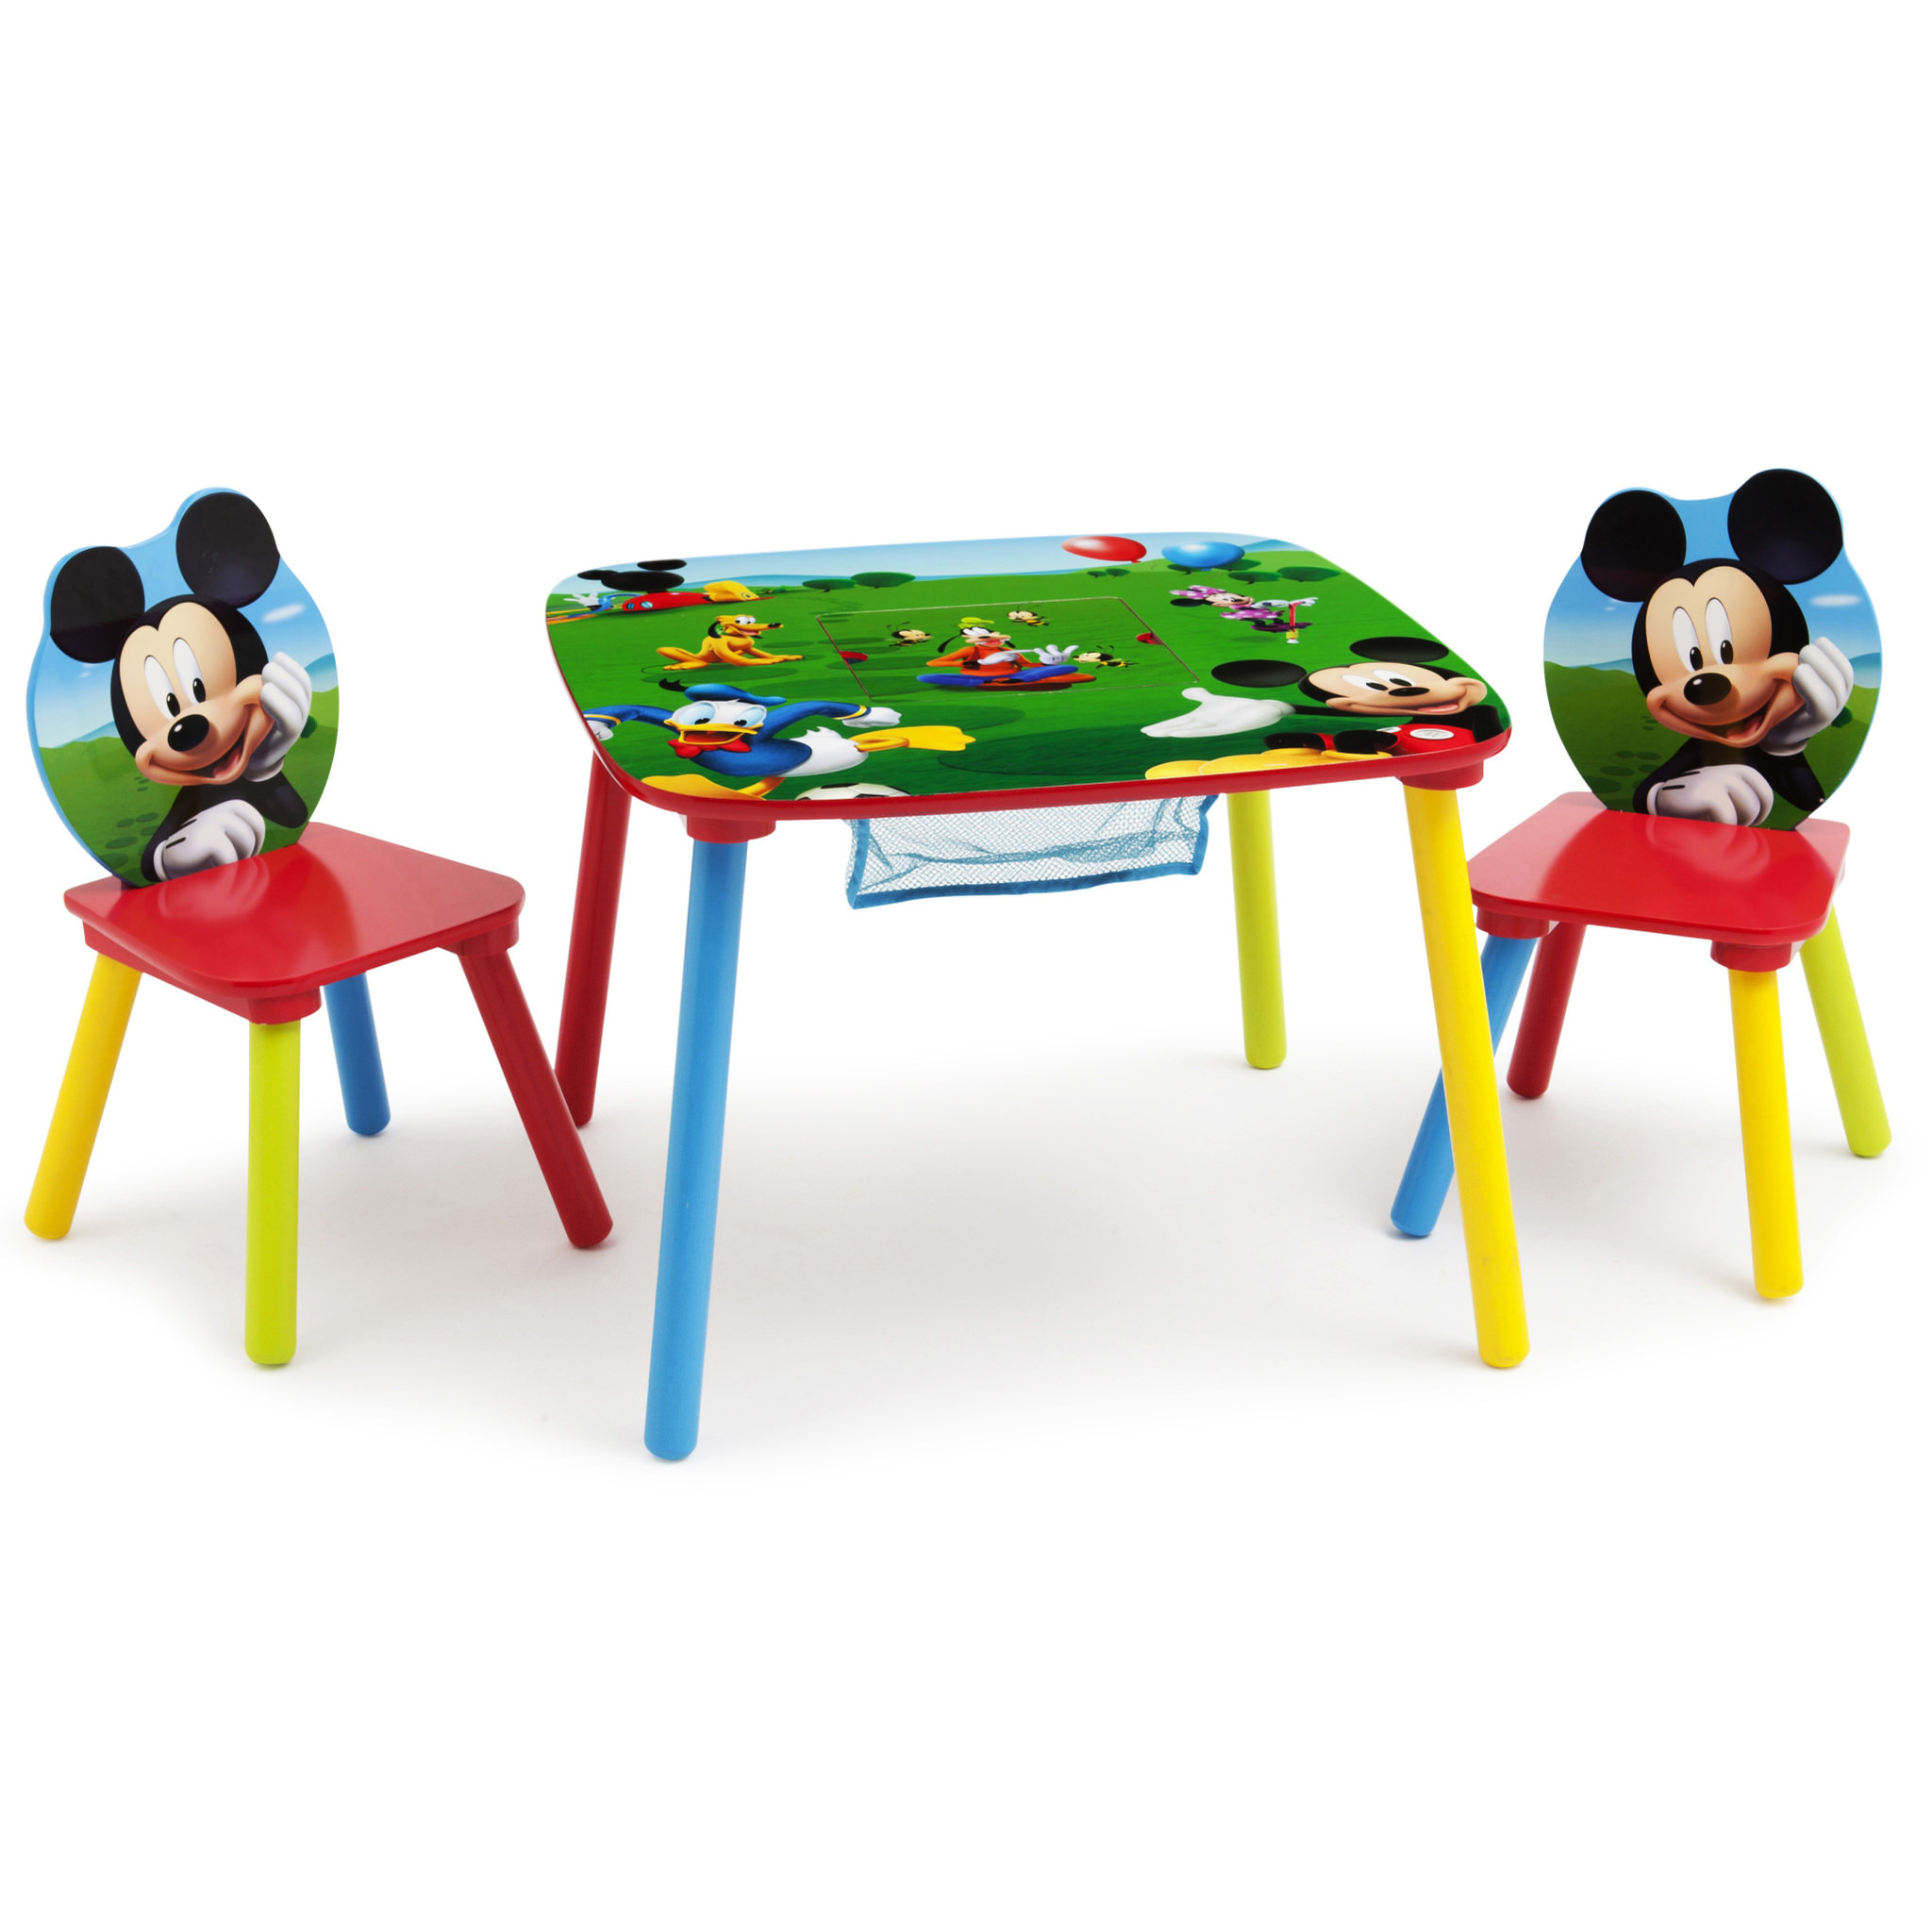 Walmart Kids Table Set
 Disney Mickey Mouse Wood Kids Storage Table and Chairs Set